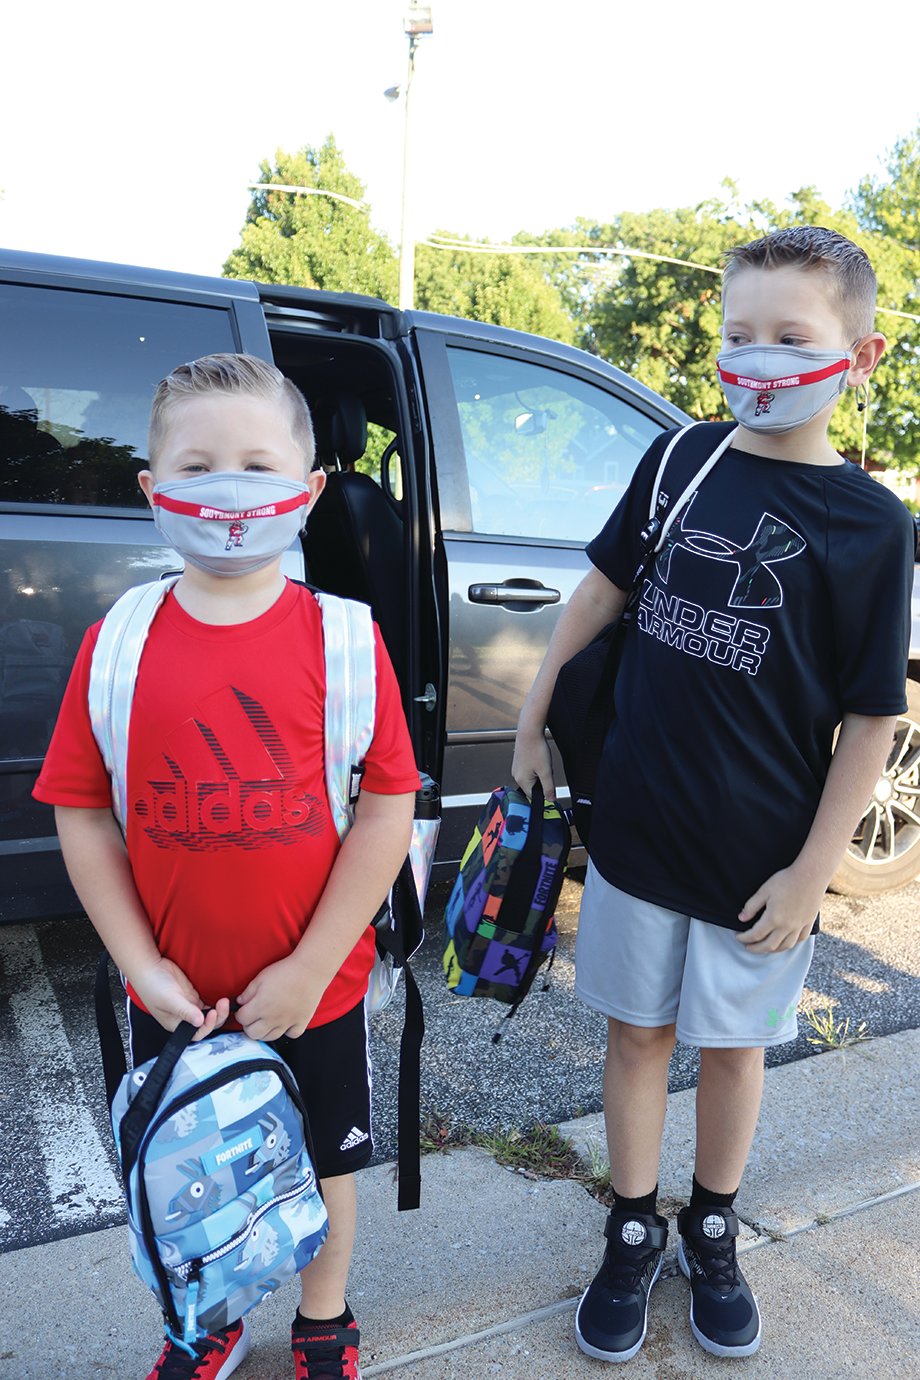 Creed and Ryder Newkirk hop out of the car Thursday for their first day of school at New Market Elementary.